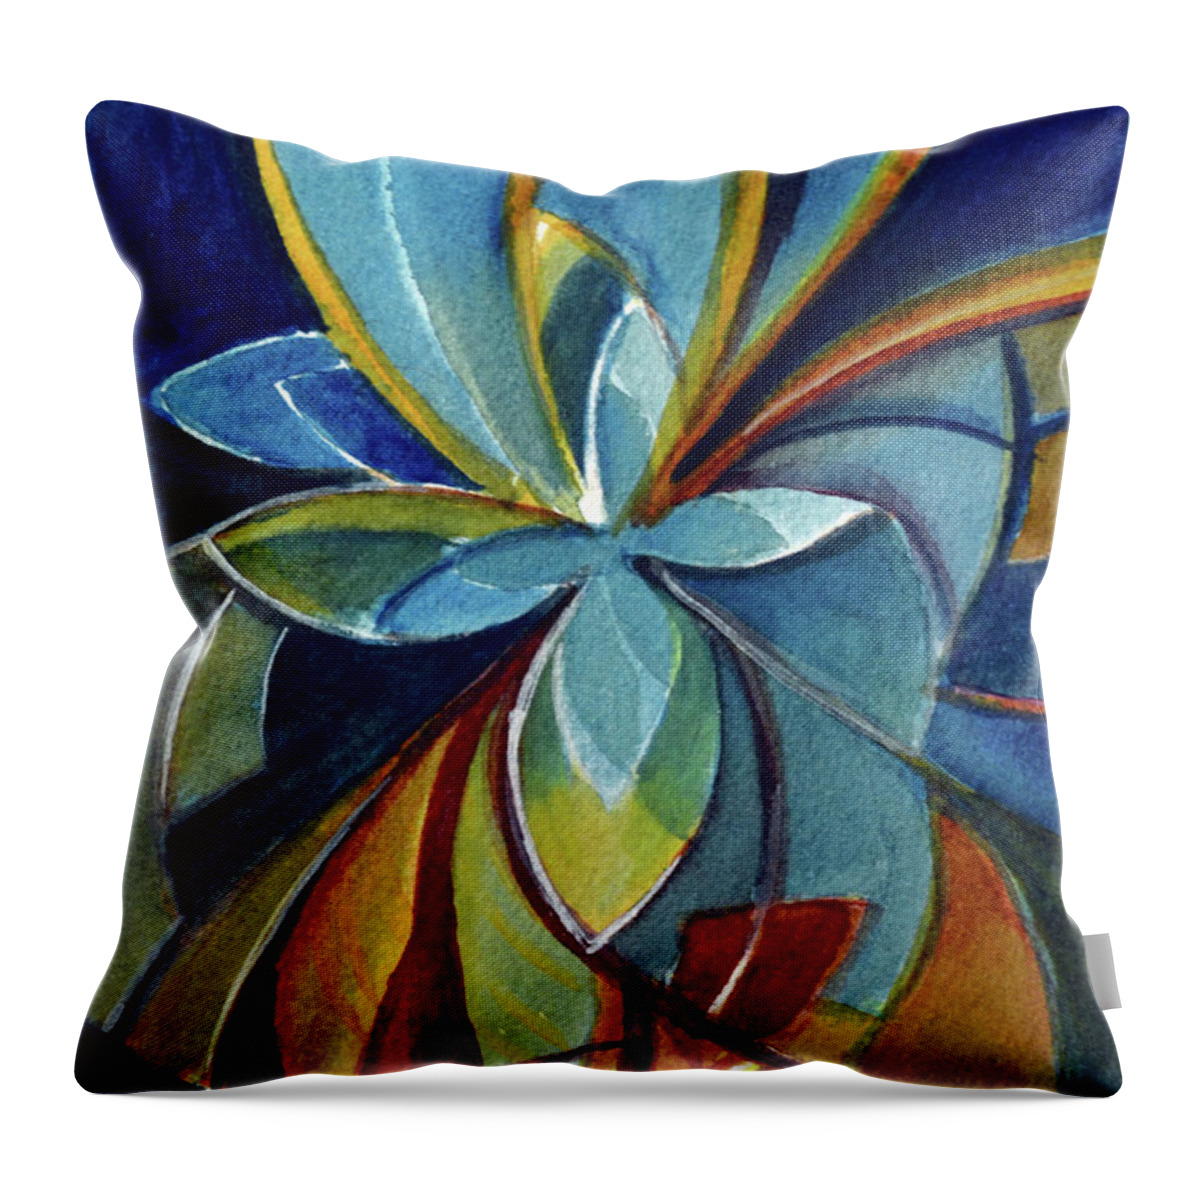 Fractal Throw Pillow featuring the painting Fractal Flower by Allison Ashton